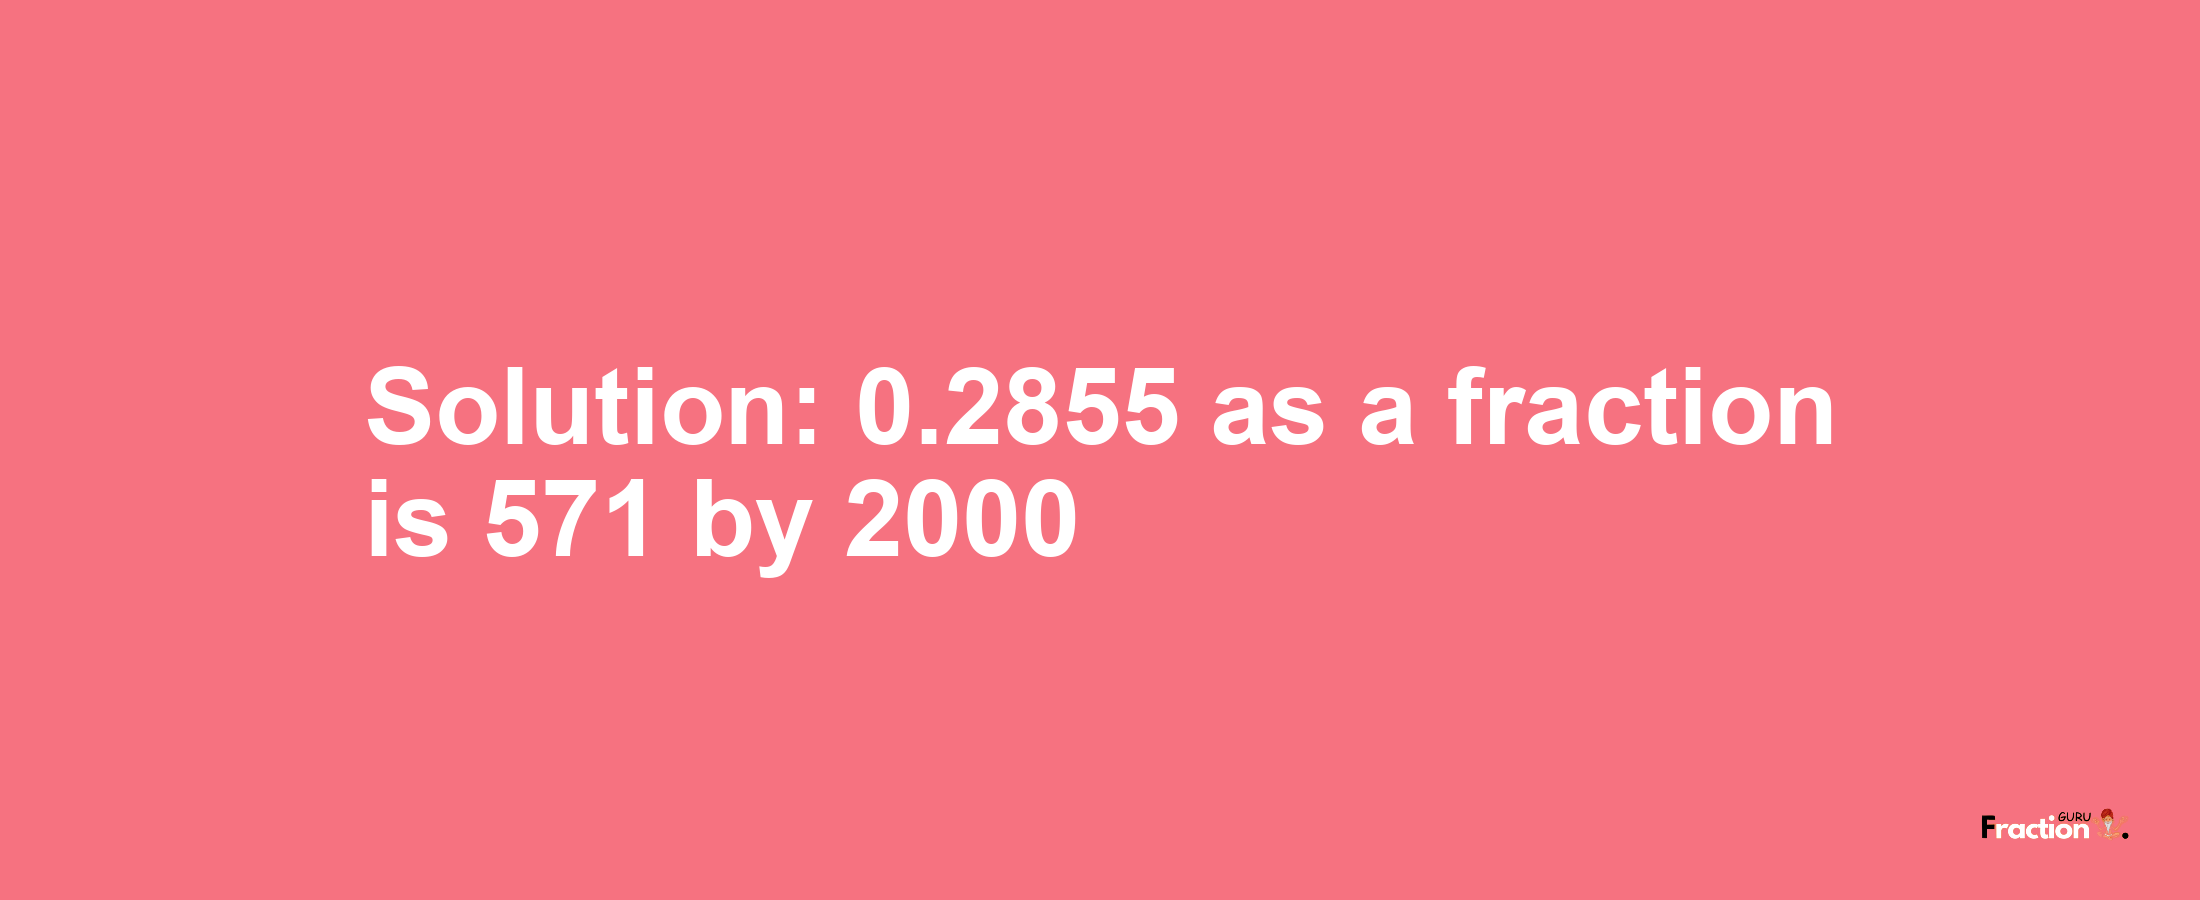 Solution:0.2855 as a fraction is 571/2000